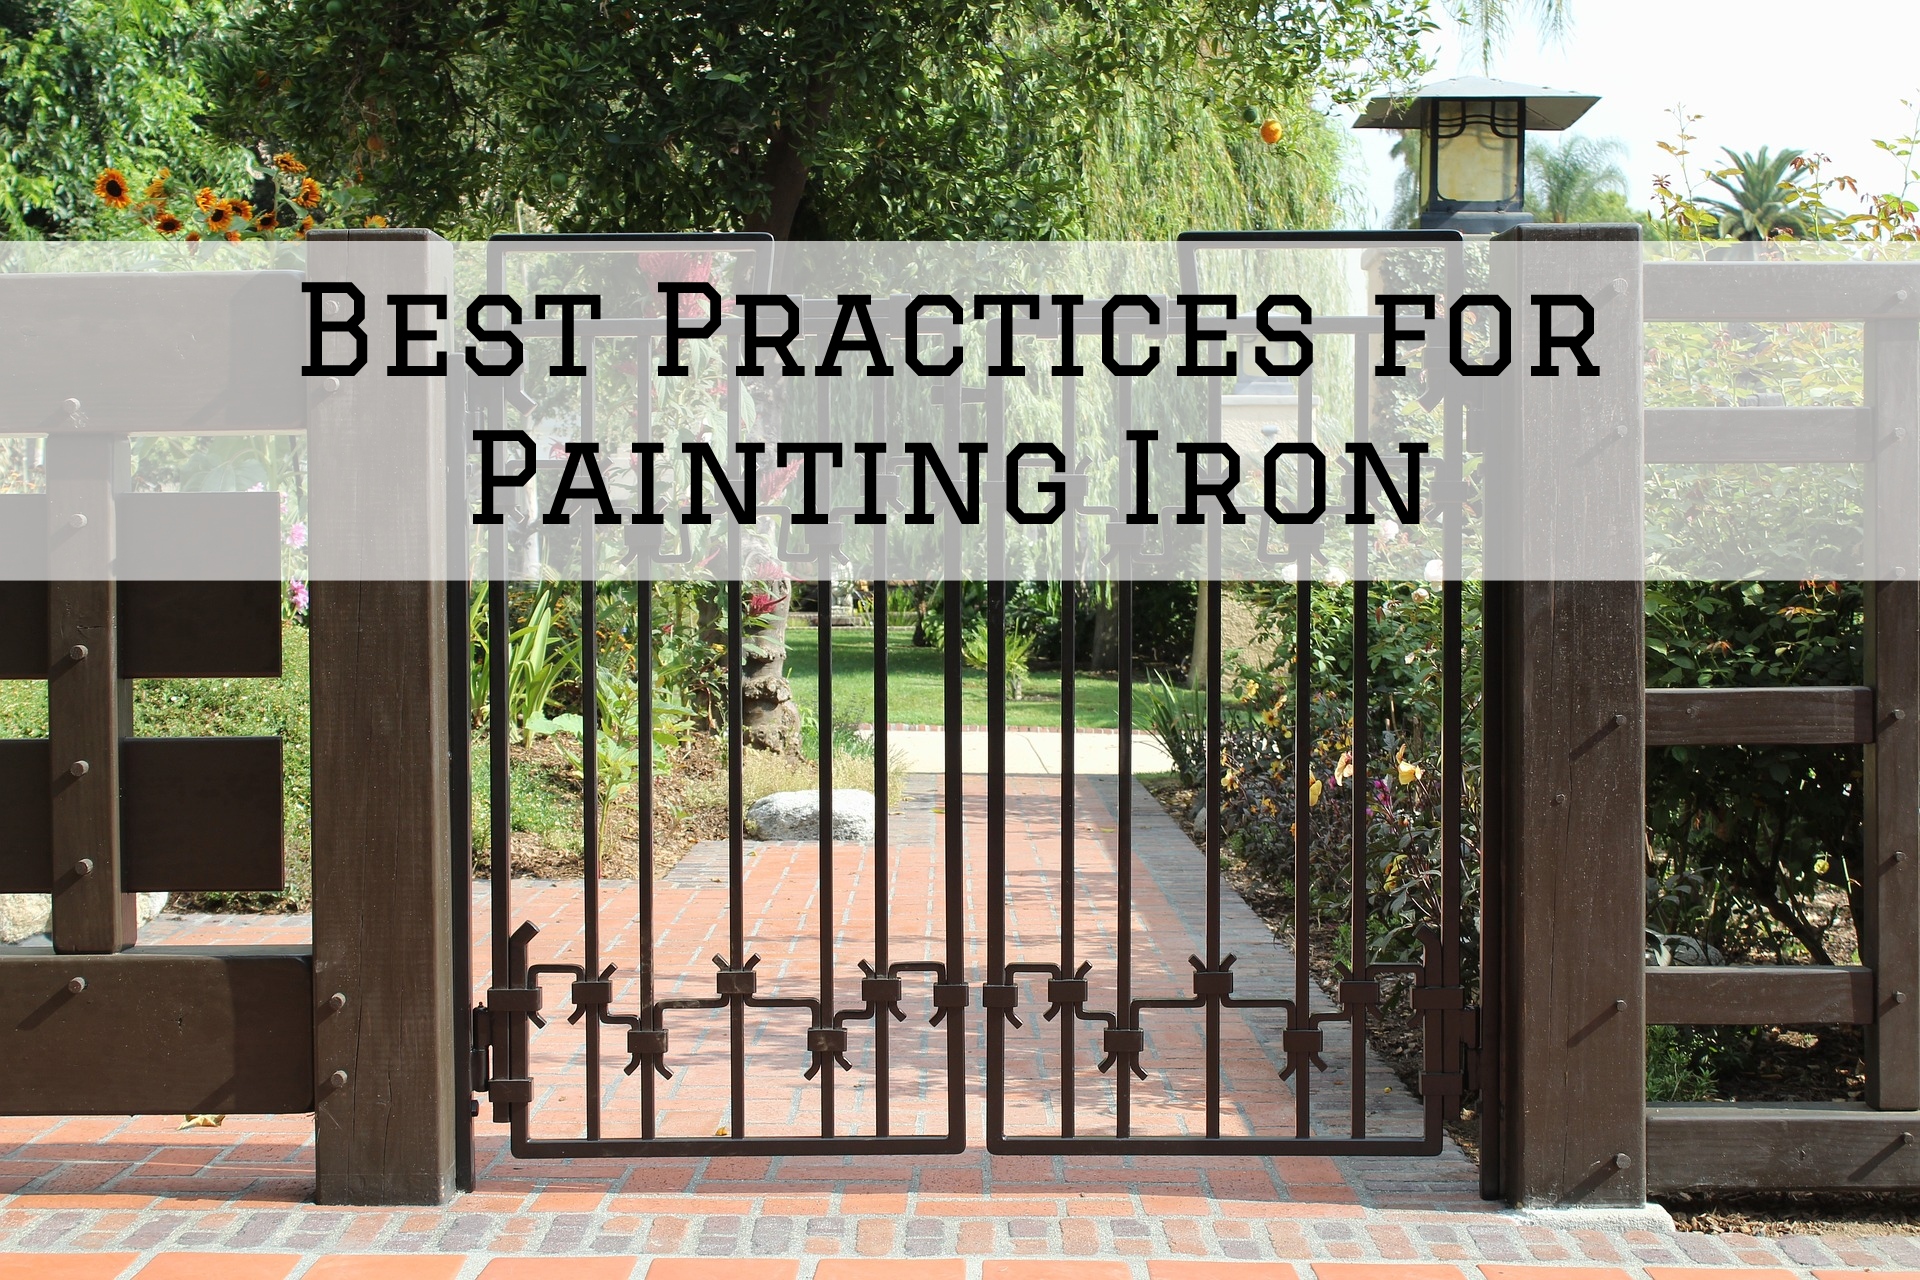 2023-07-21 Left Moon Painting Unionville PA Painting Iron Best Practices